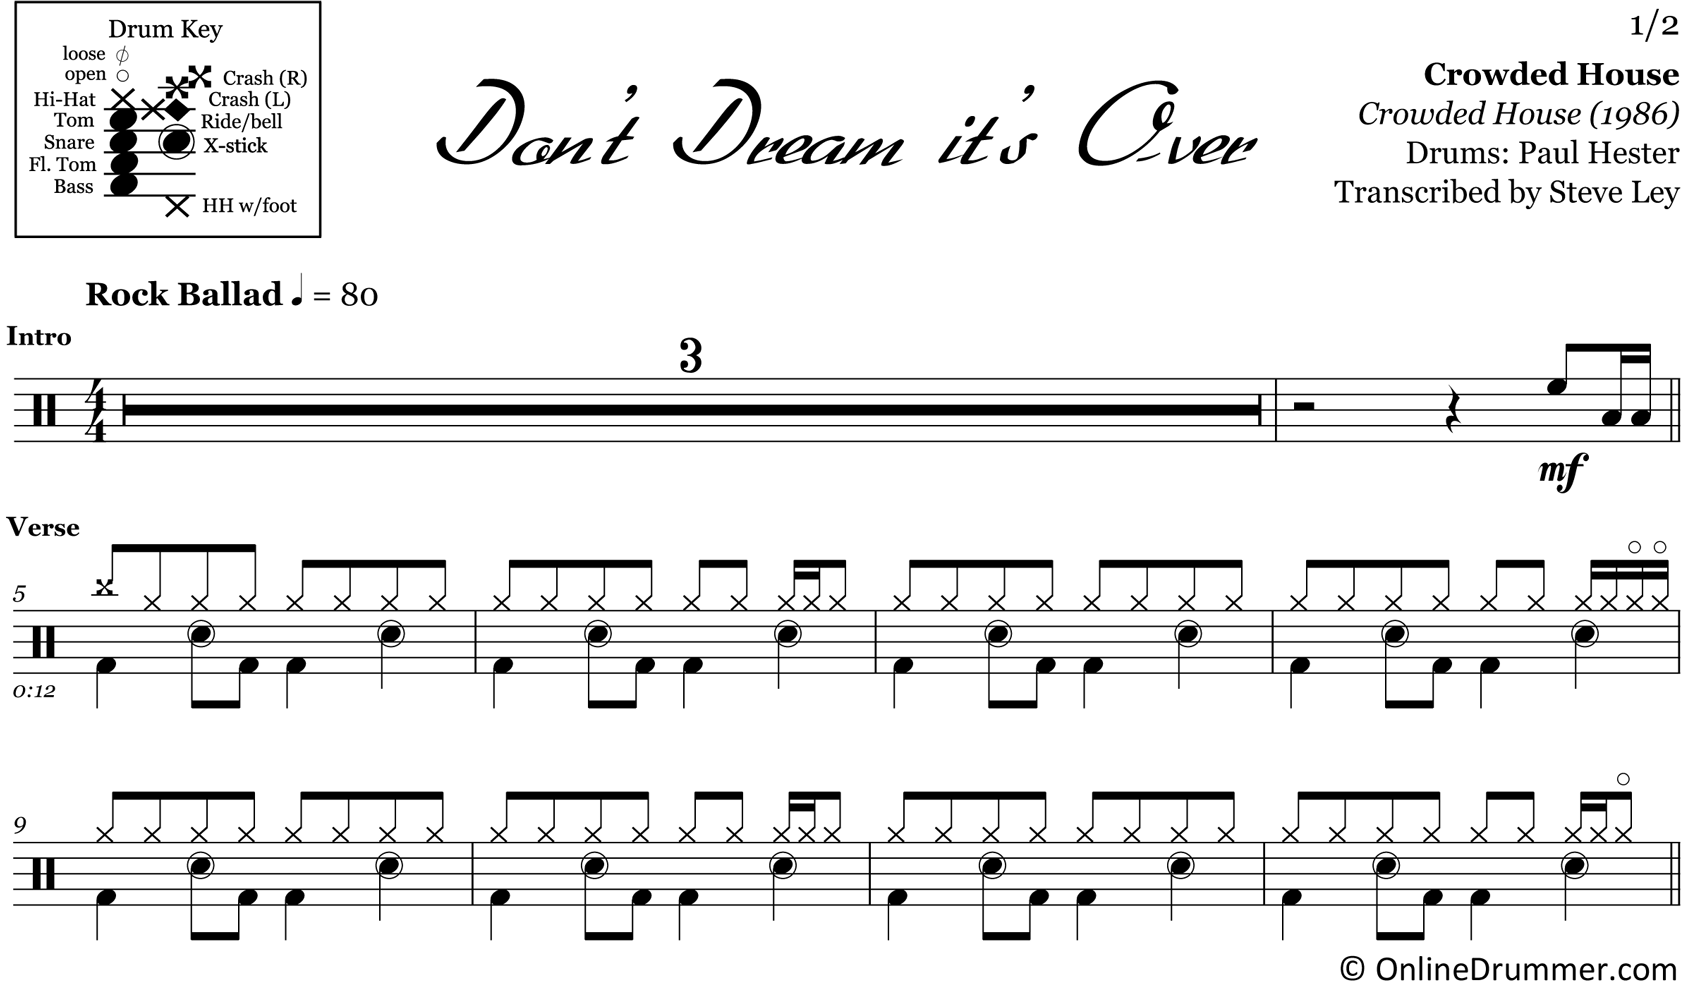 Don't Dream It's Over - Crowded House - Drum Sheet Music